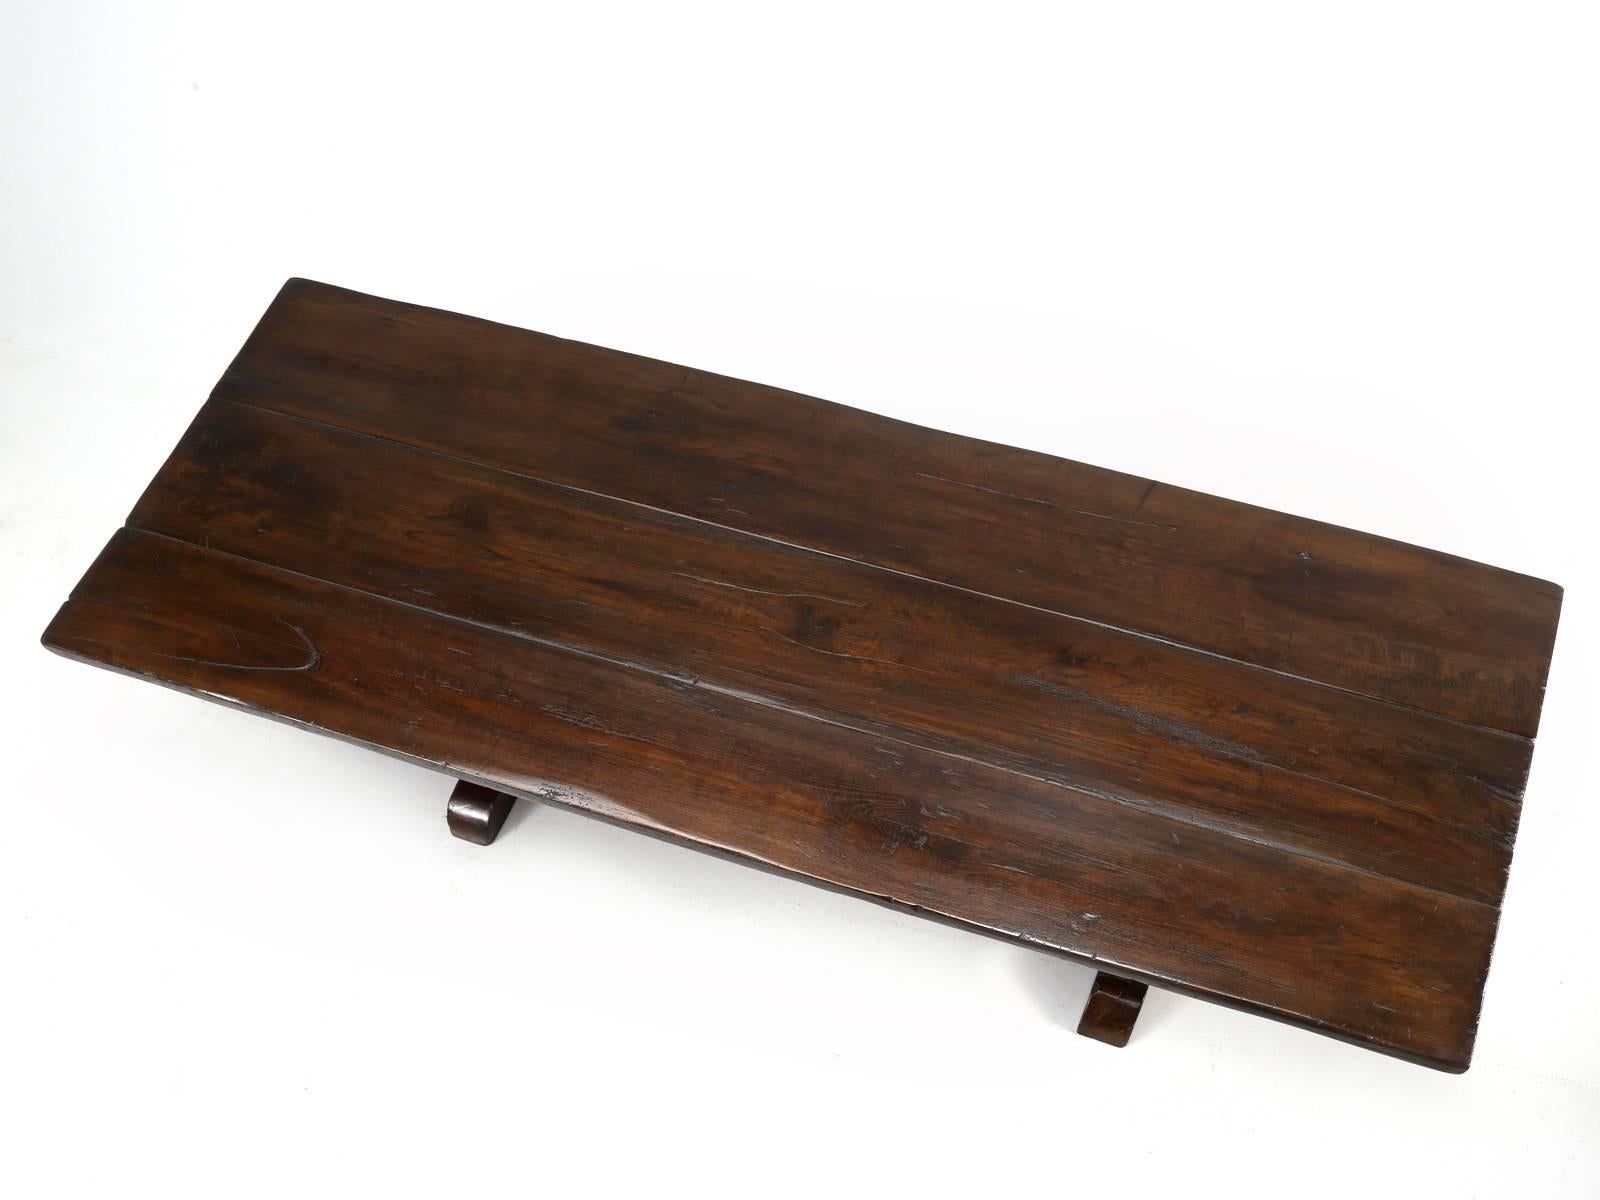 Antique French oak farm table, probably made in the early 1900s, although it is almost impossible to date a farm table accurately. This antique French oak farm table’s top, is made up of only three wide planks of oak and that usually is a good